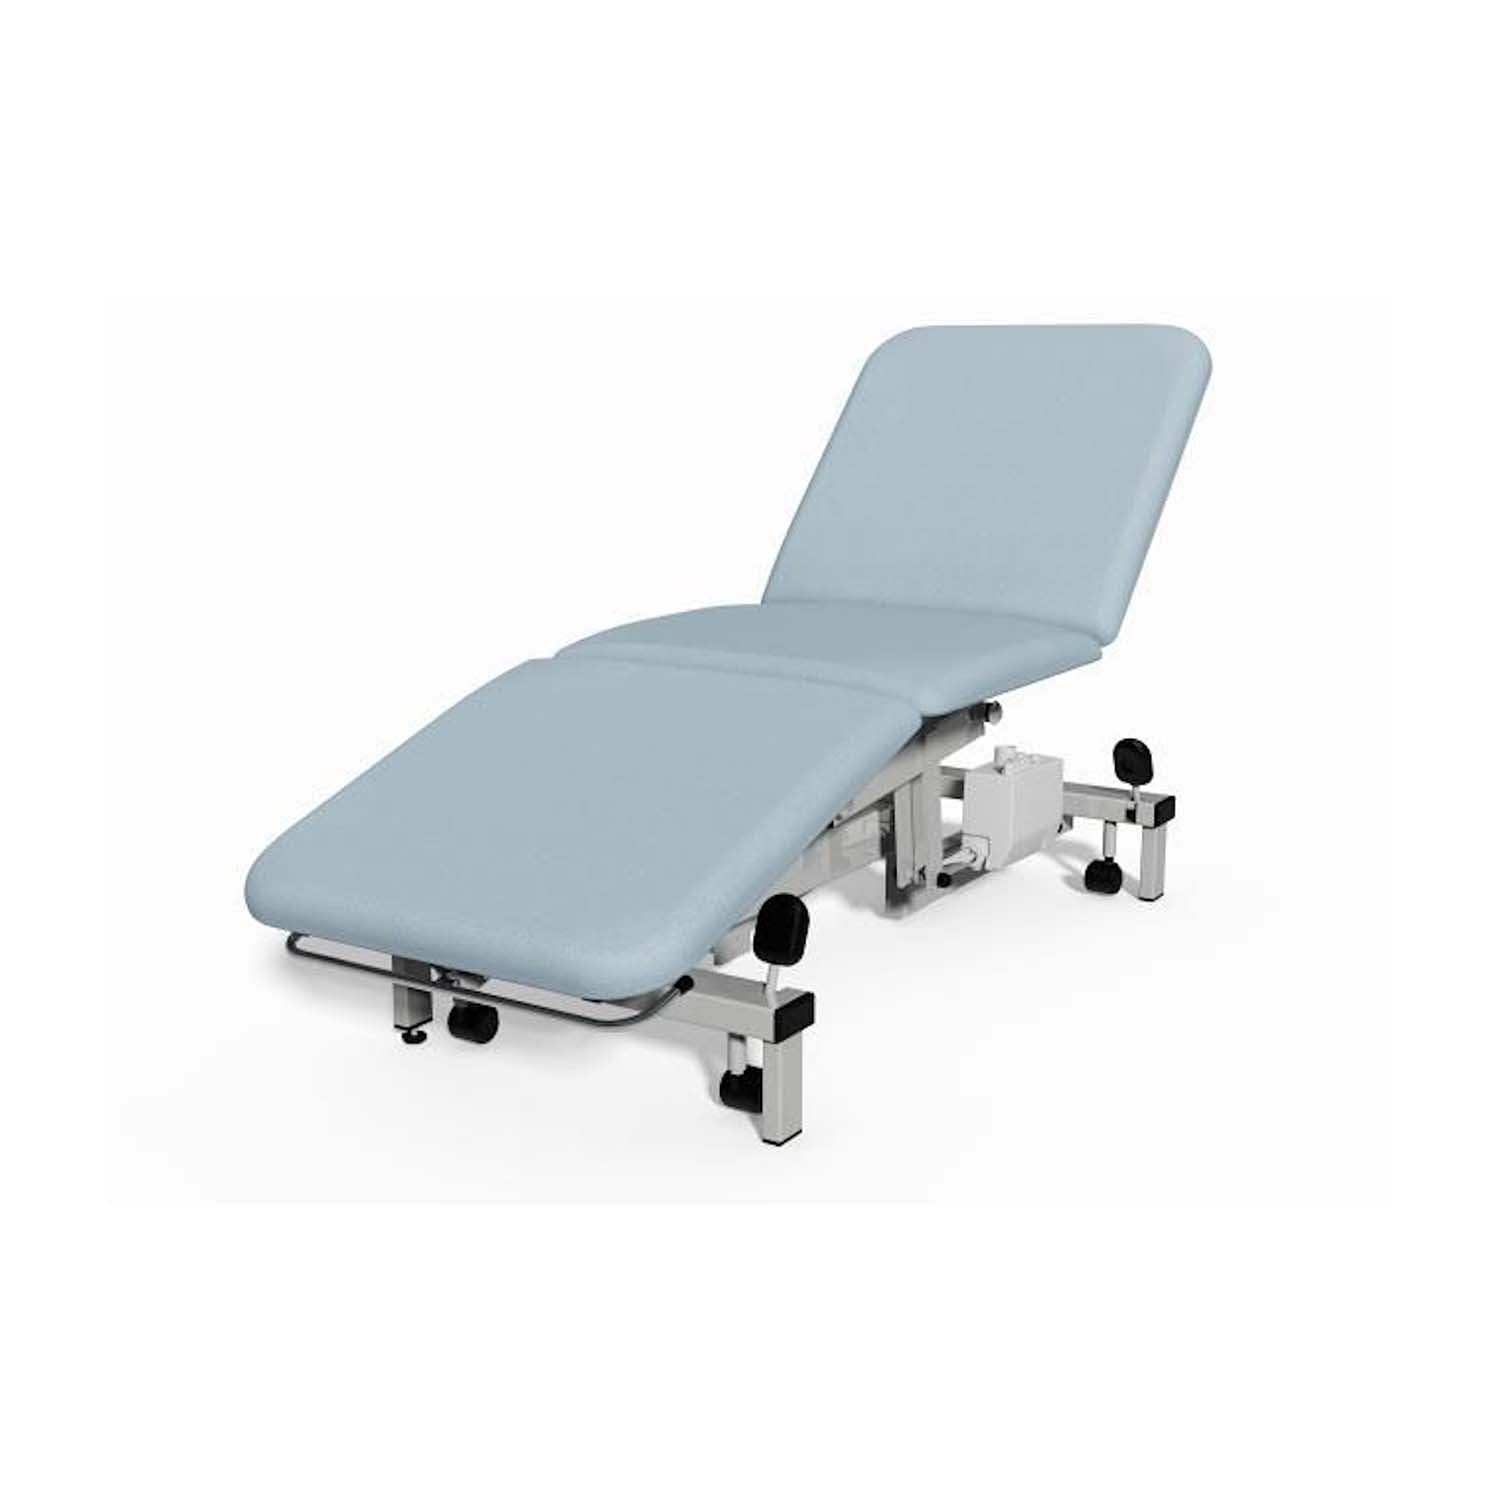 Plinth 2000 Model 503 3 Section Examination Couch | Hydraulic | Cool Blue